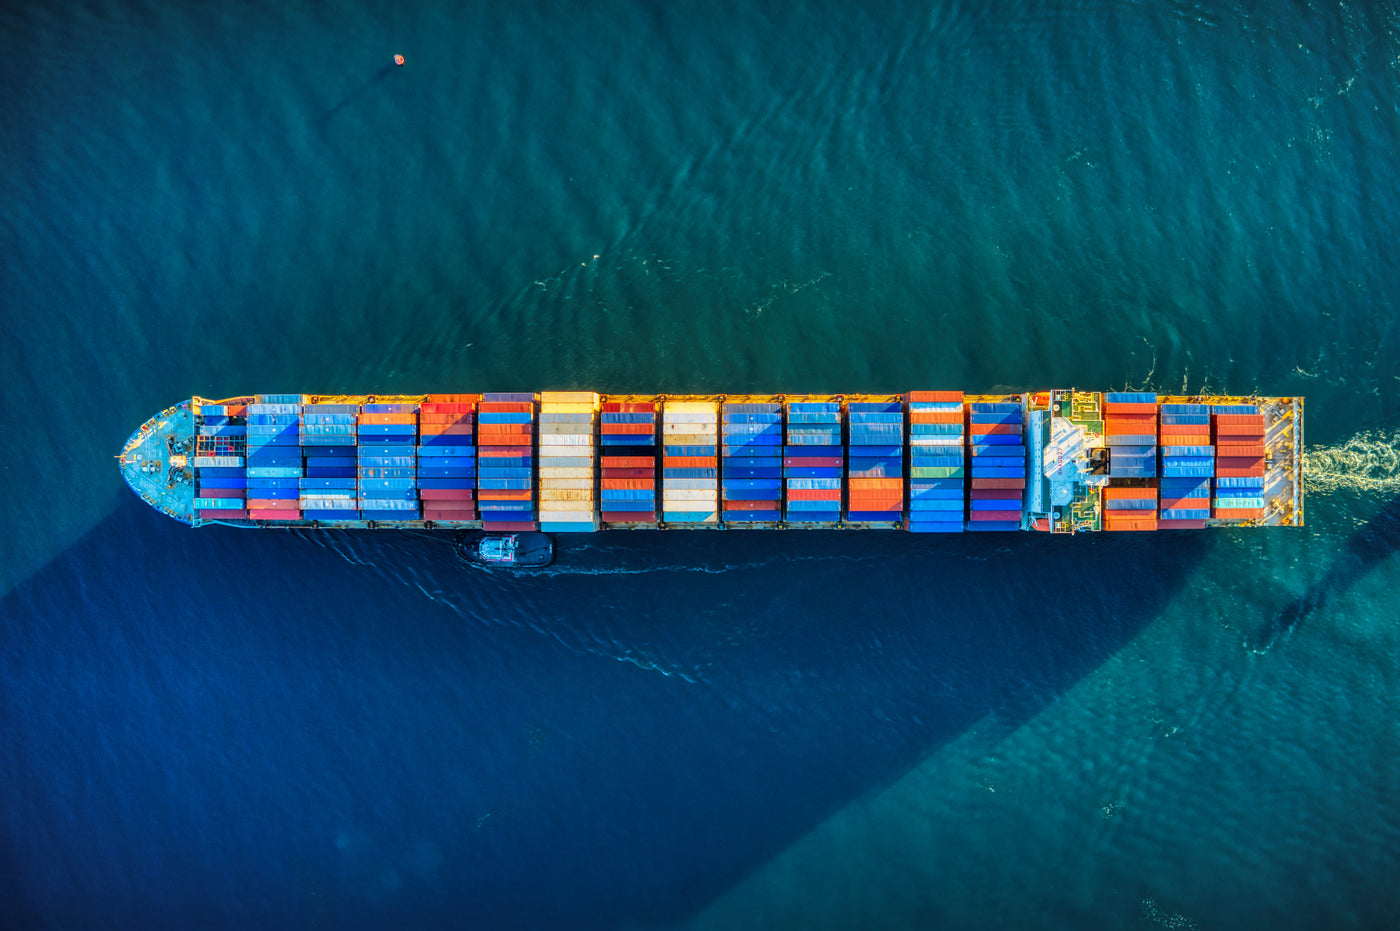 Cargo ship with colorful cargo containers on the ocean